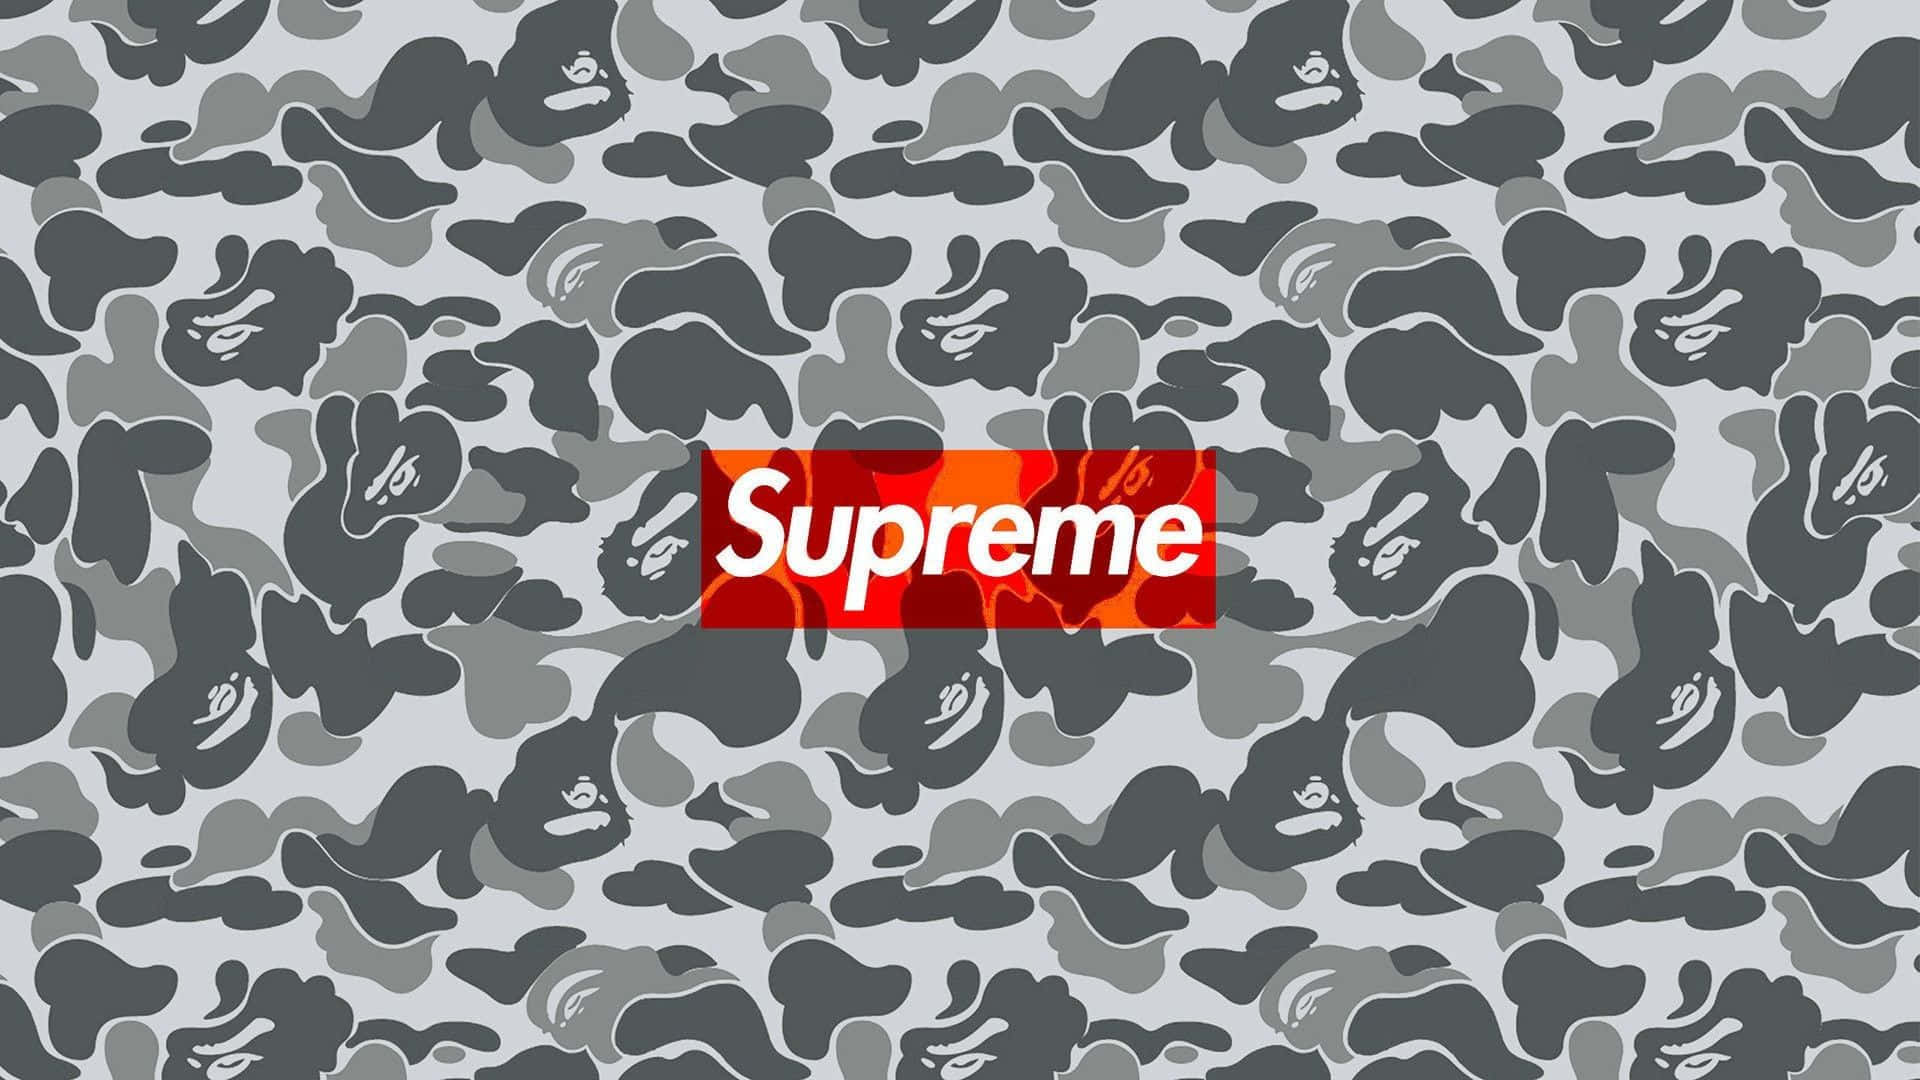 Stand out in the crowd with Bape Camo Wallpaper